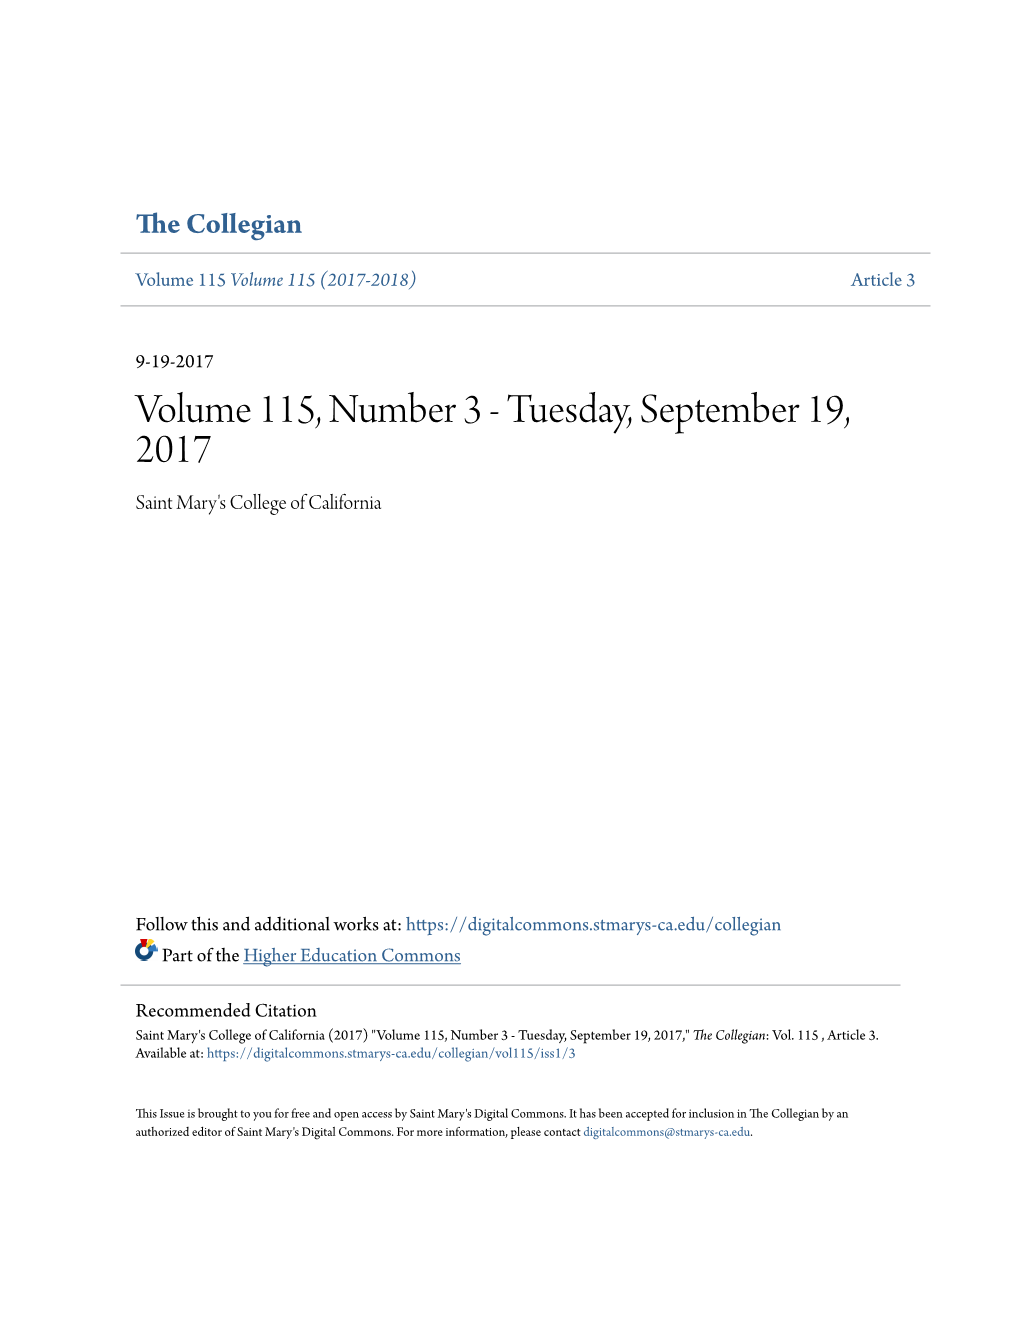 Volume 115, Number 3 - Tuesday, September 19, 2017 Saint Mary's College of California